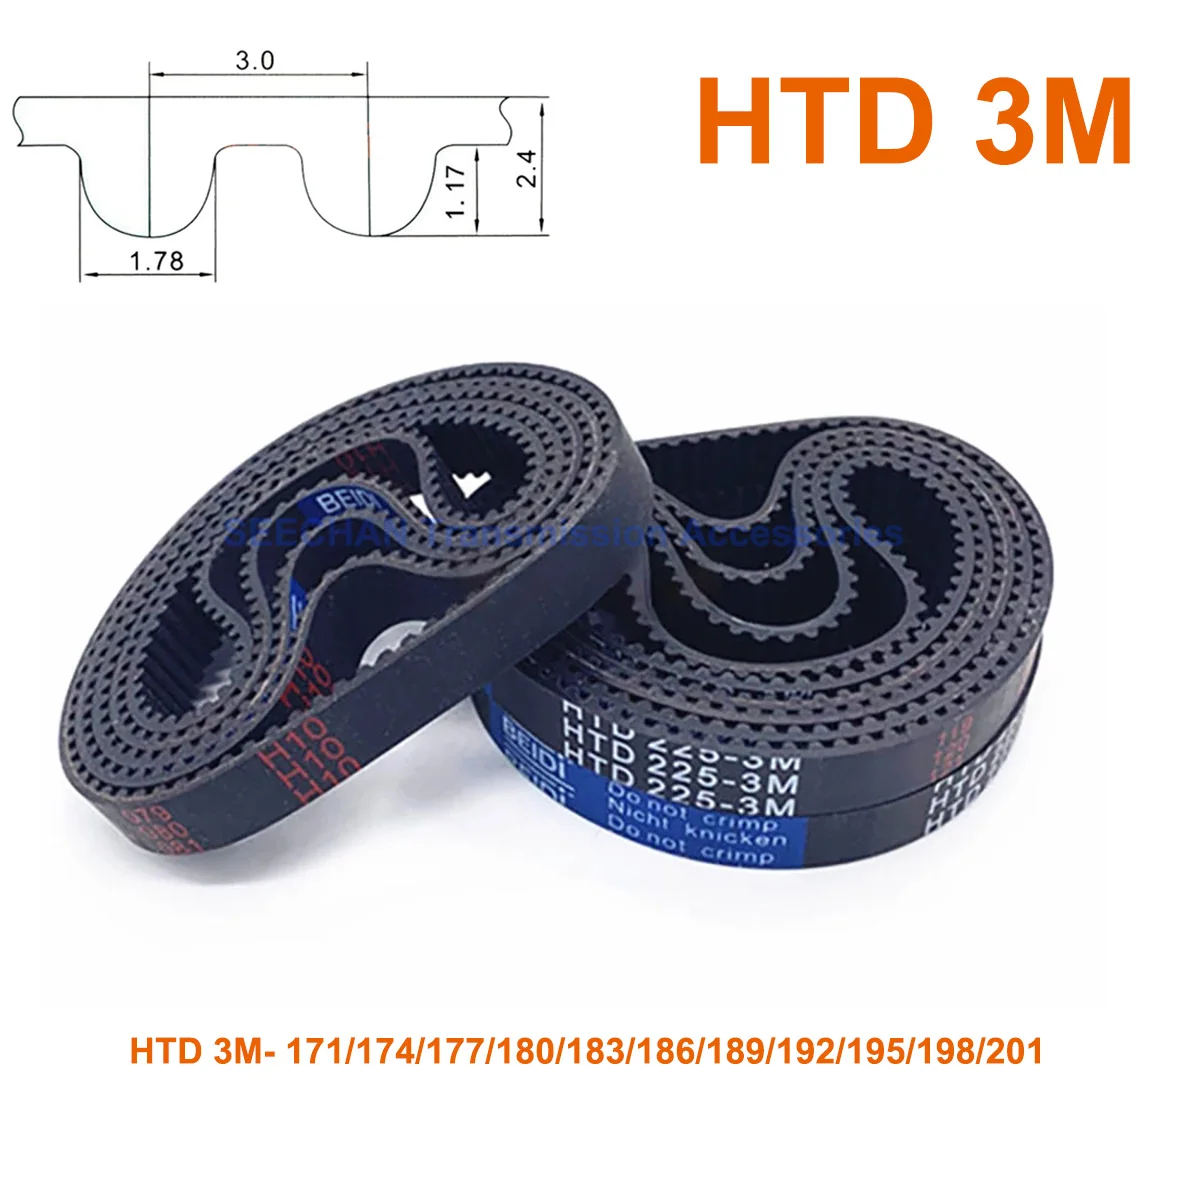 

Closed Loop HTD 3M Rubber Synchronous Timing Belt Width 6 10 15 20mm Perimeter 171 174 177 180 183 186 189 192 195 198 201mm